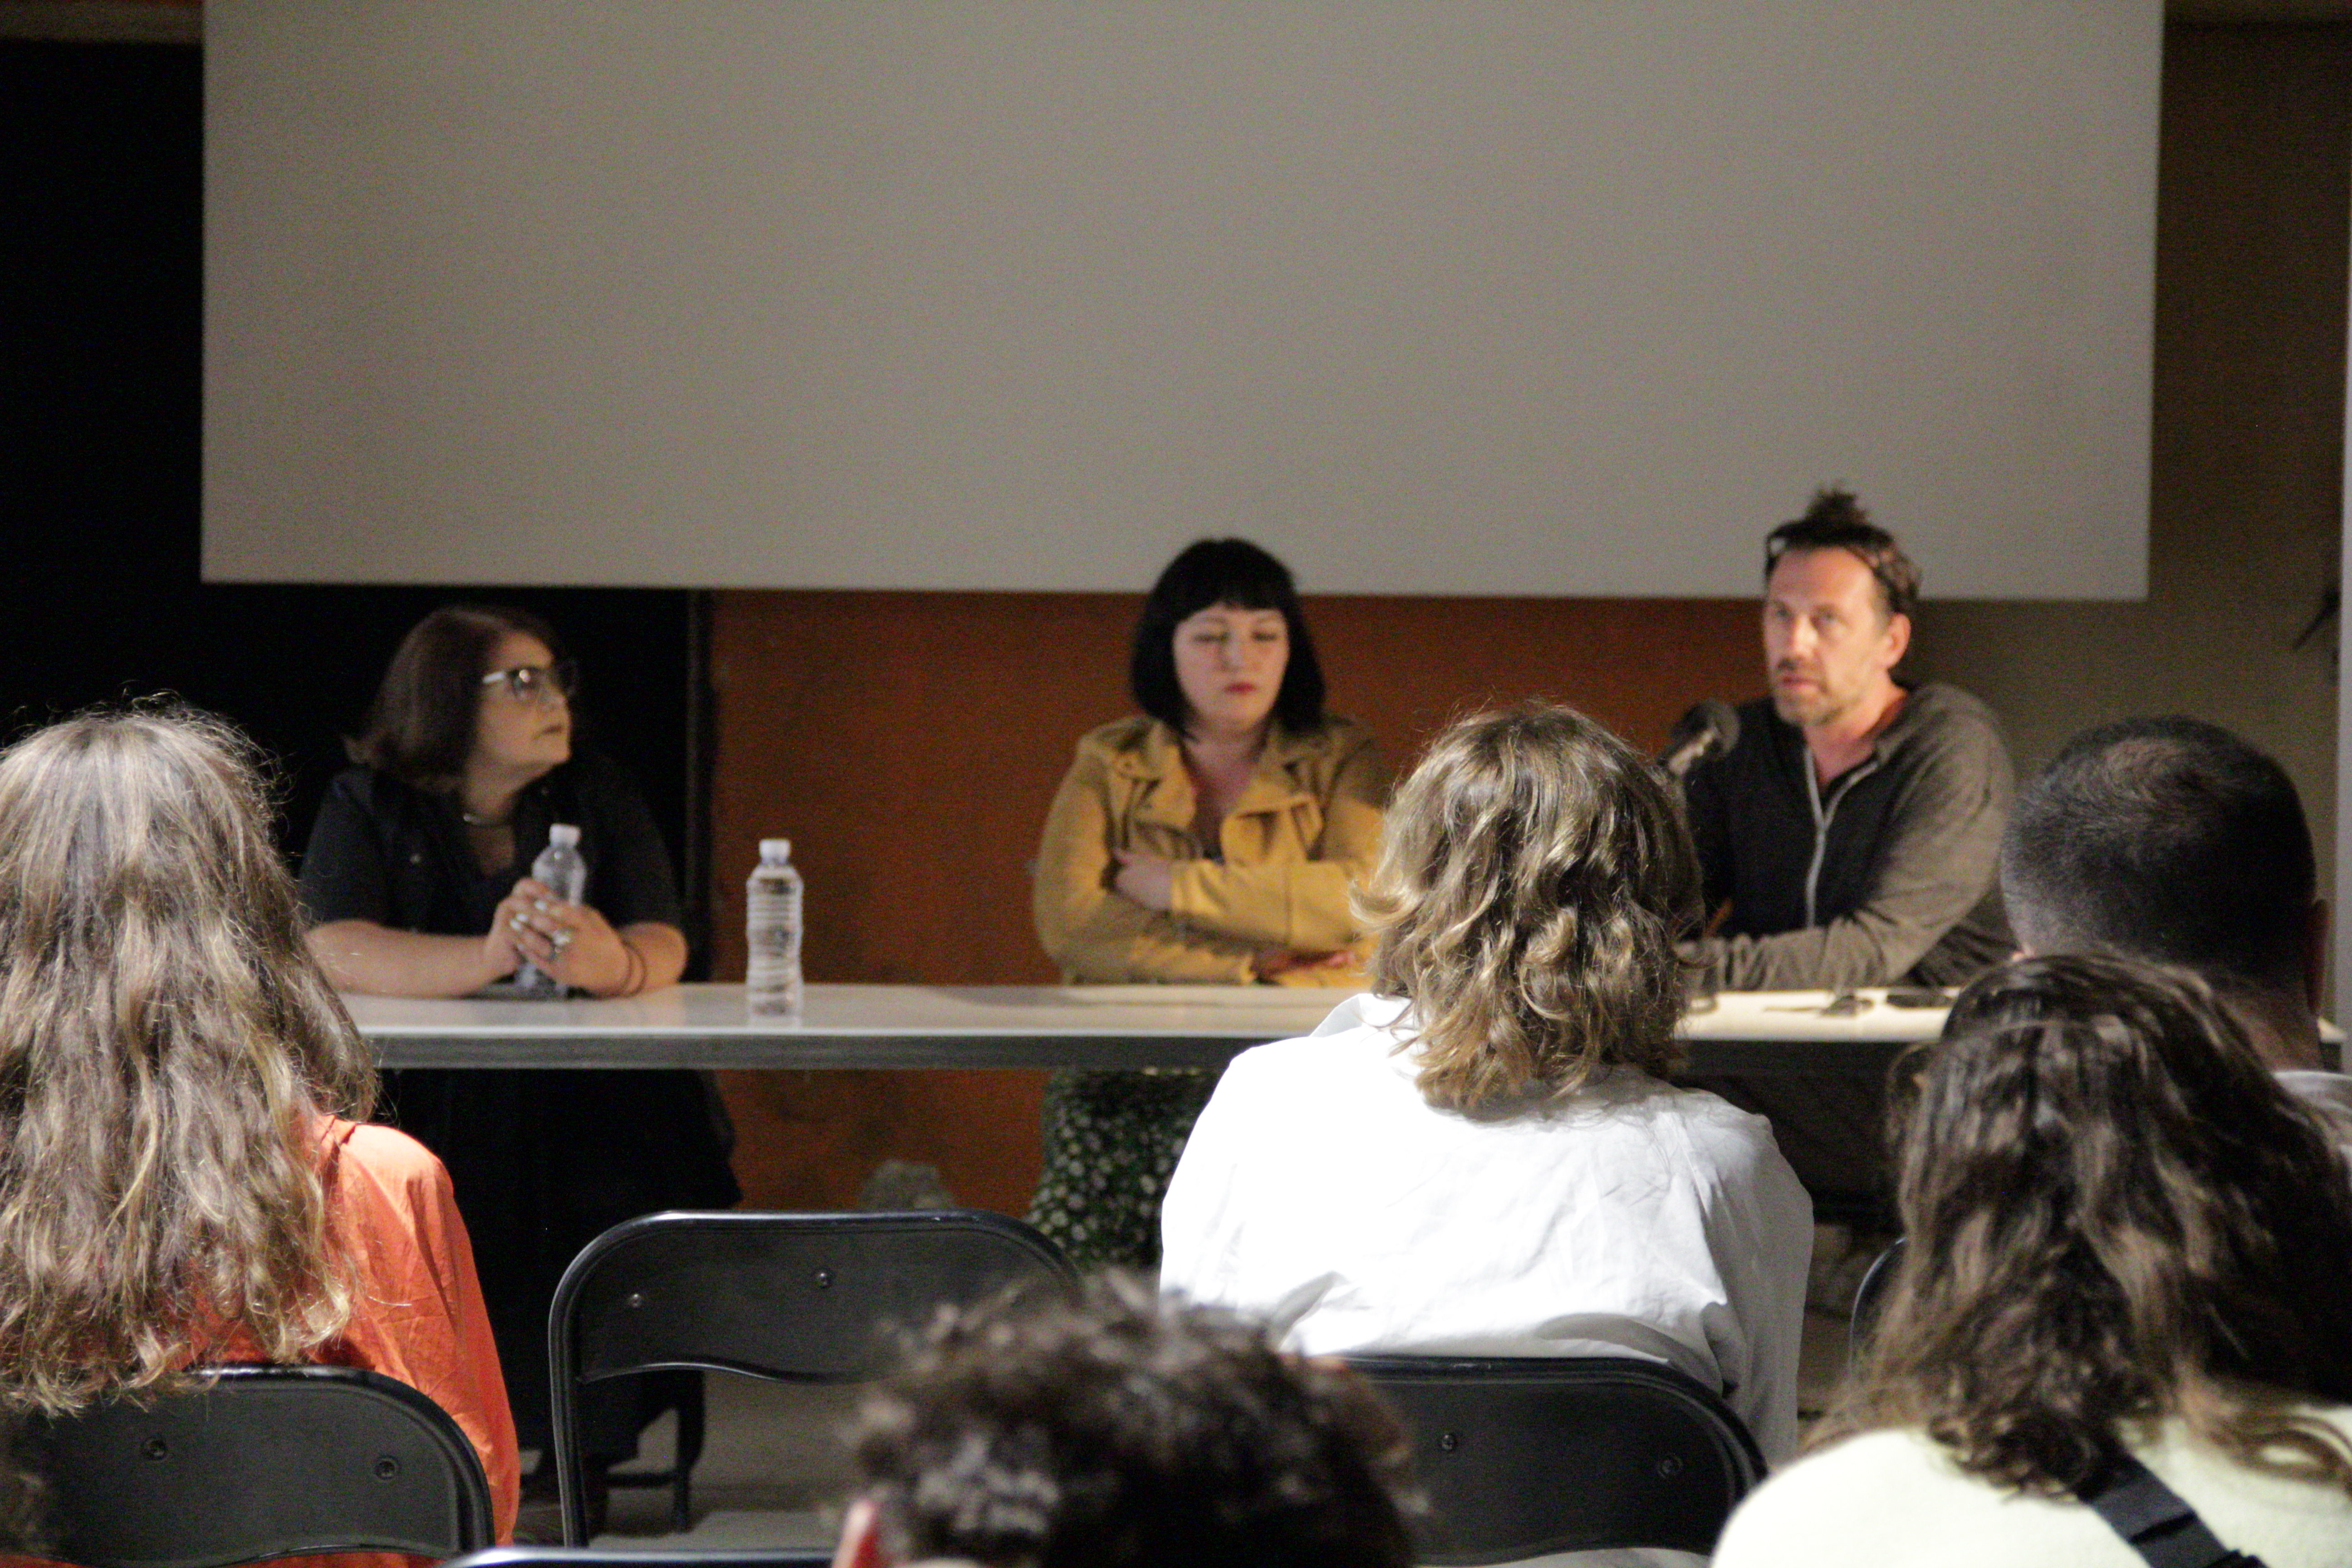 Conference 2: Public Hearing on Remembering What, For Whom and Why Manifesta